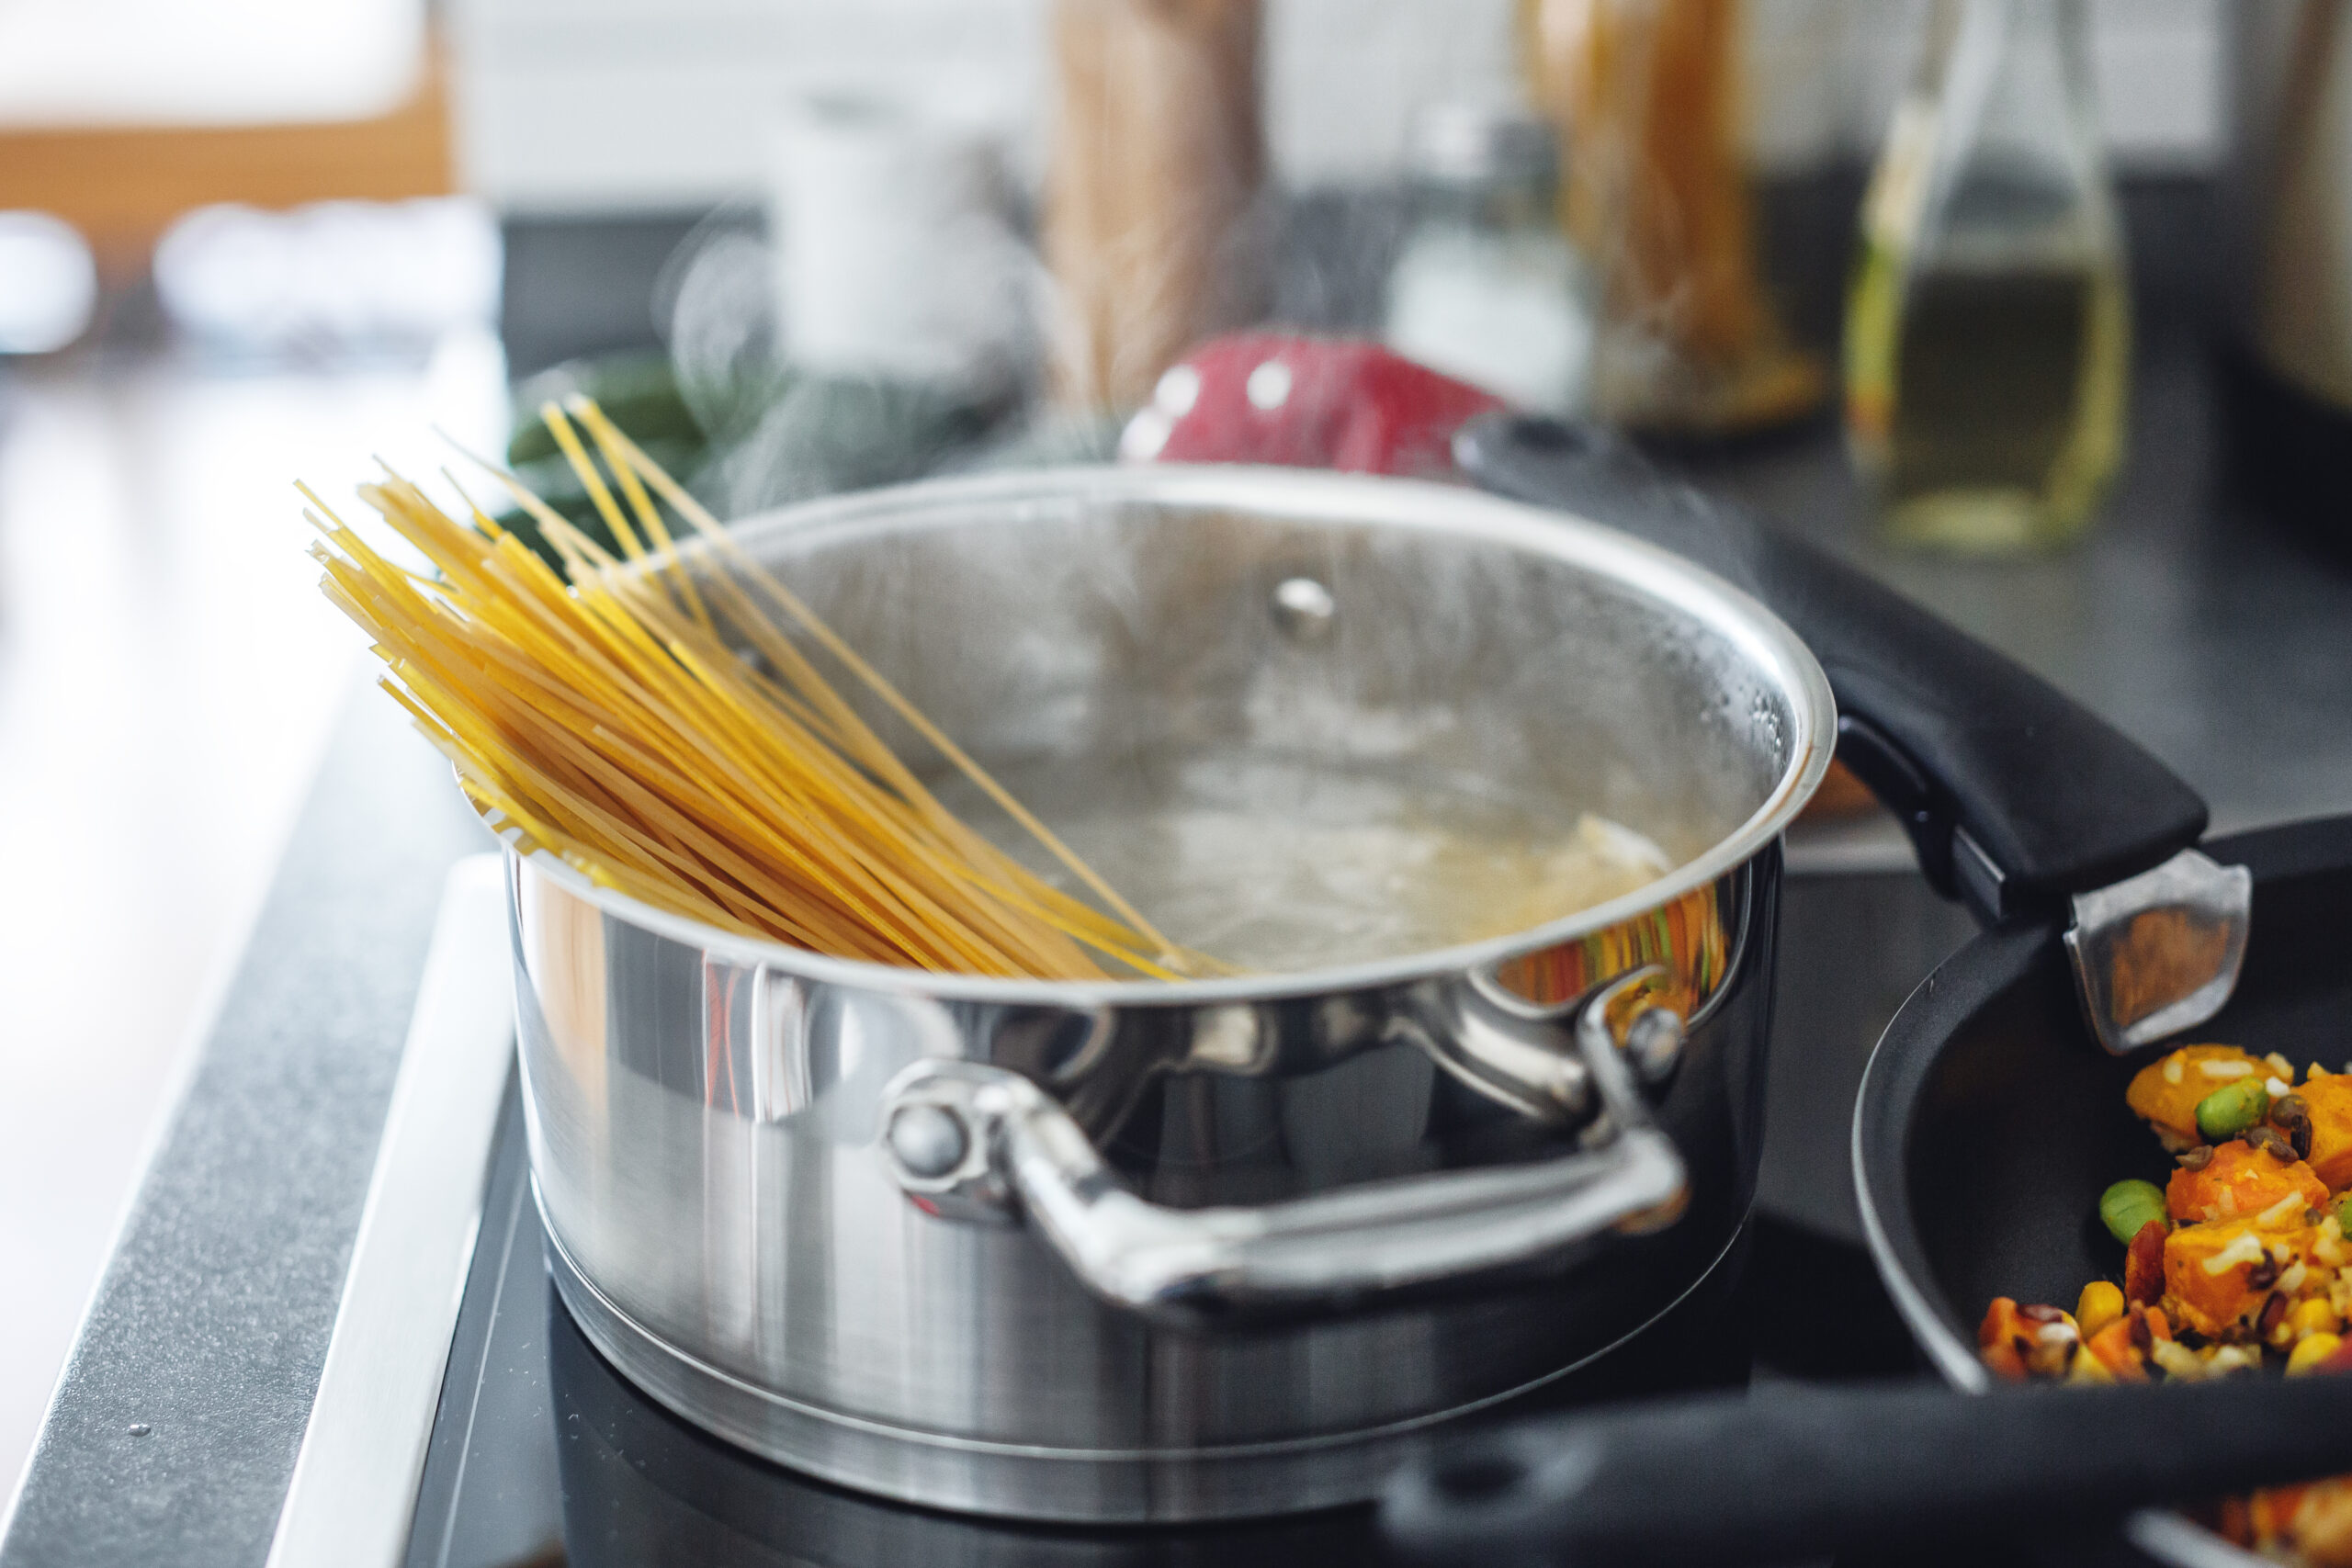 Here's how to use a pasta pan the Italian way